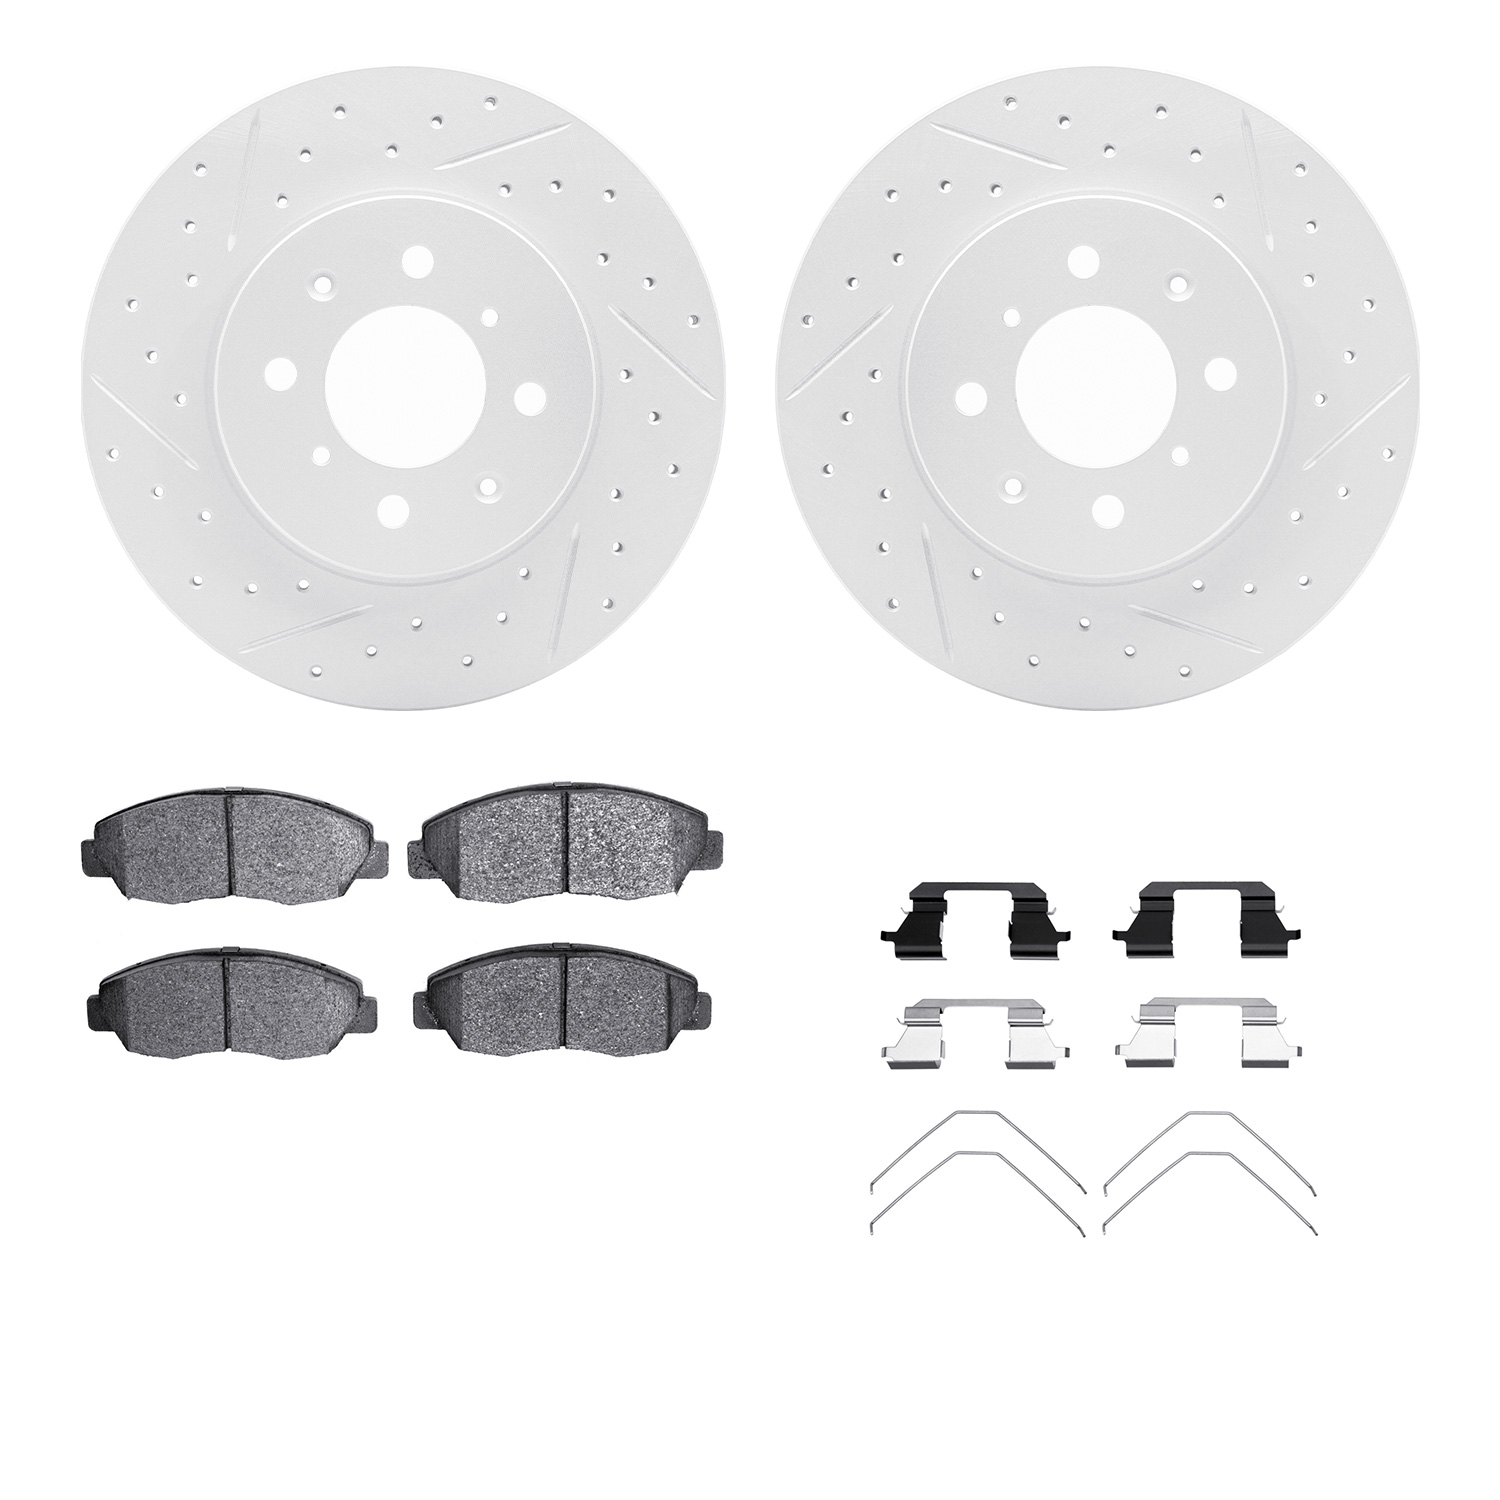 2512-59012 Geoperformance Drilled/Slotted Rotors w/5000 Advanced Brake Pads Kit & Hardware, 1996-2014 Acura/Honda, Position: Fro